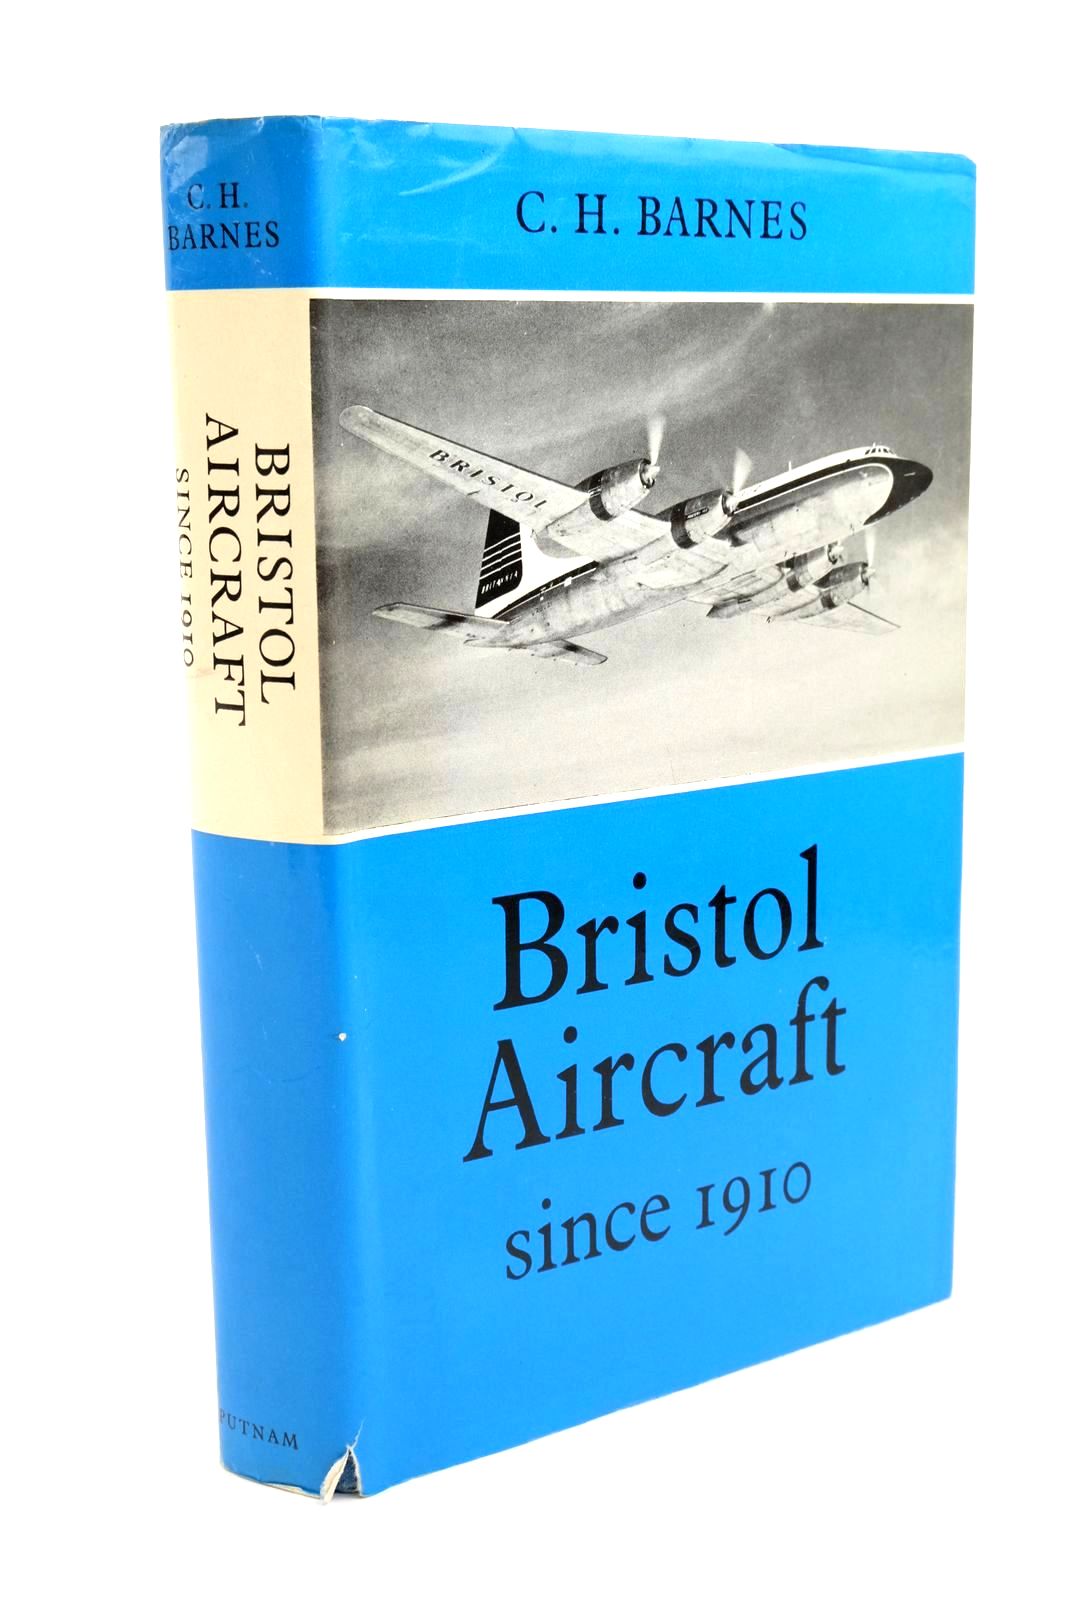 Photo of BRISTOL AIRCRAFT SINCE 1910 written by Barnes, C.H. published by Putnam (STOCK CODE: 1322021)  for sale by Stella & Rose's Books